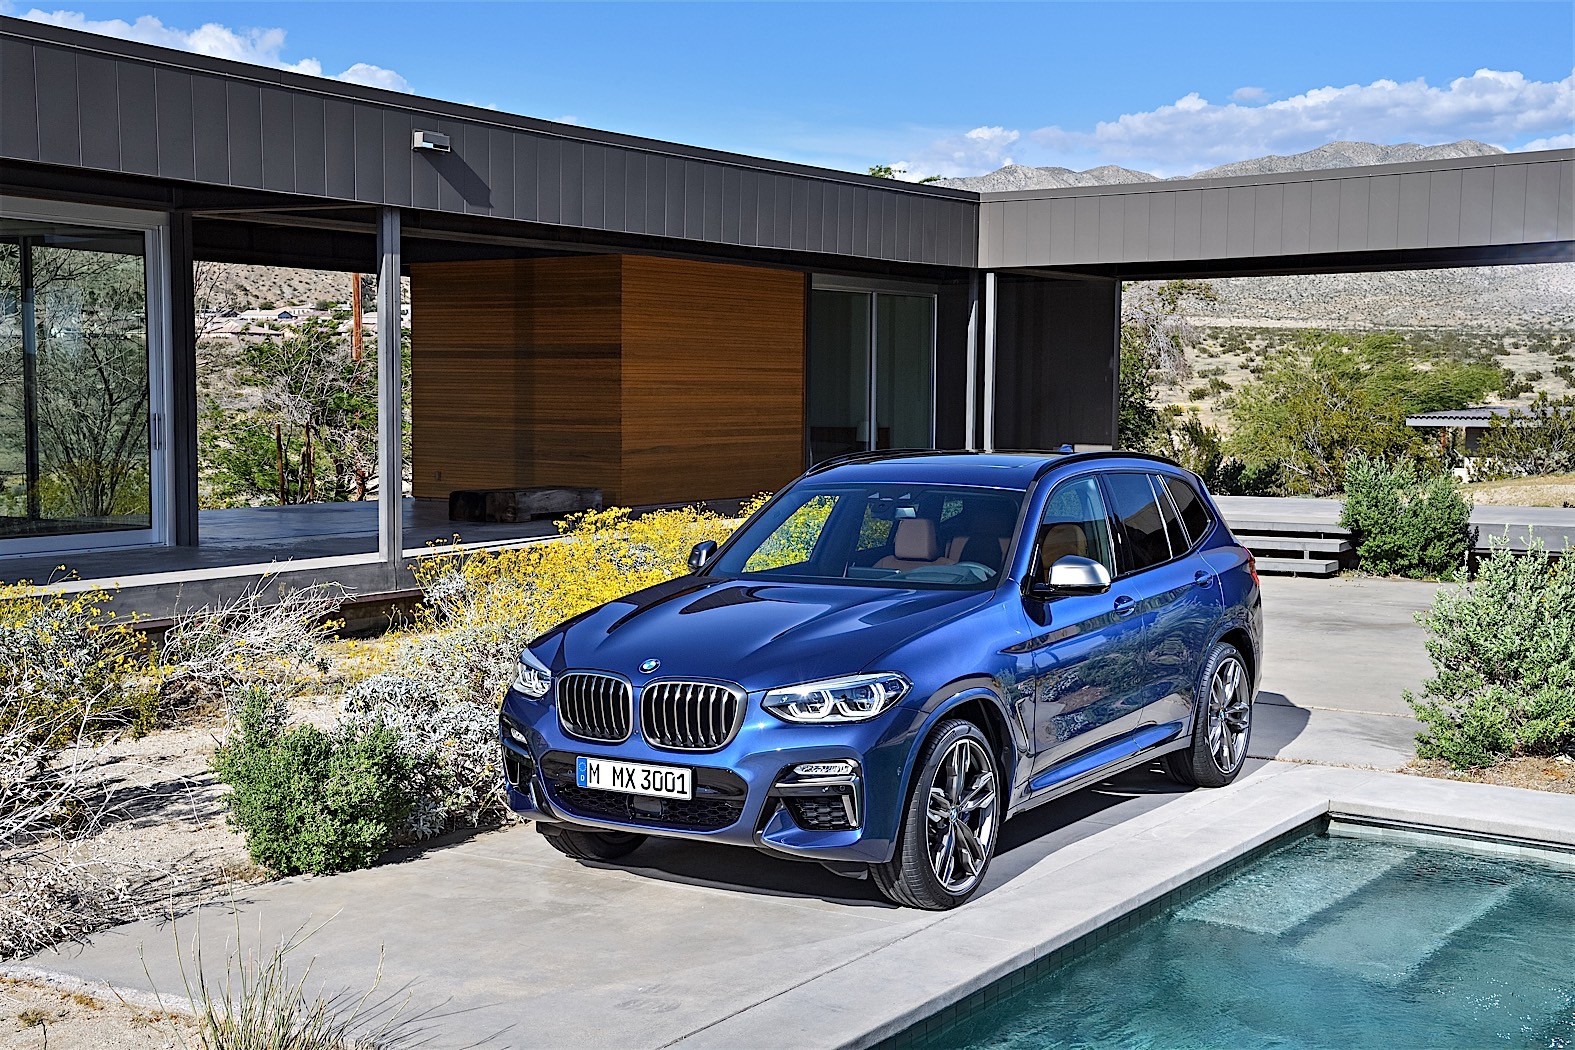 BMW X3 EV To Be Called BMX iX3, Coming In 2020 - autoevolution